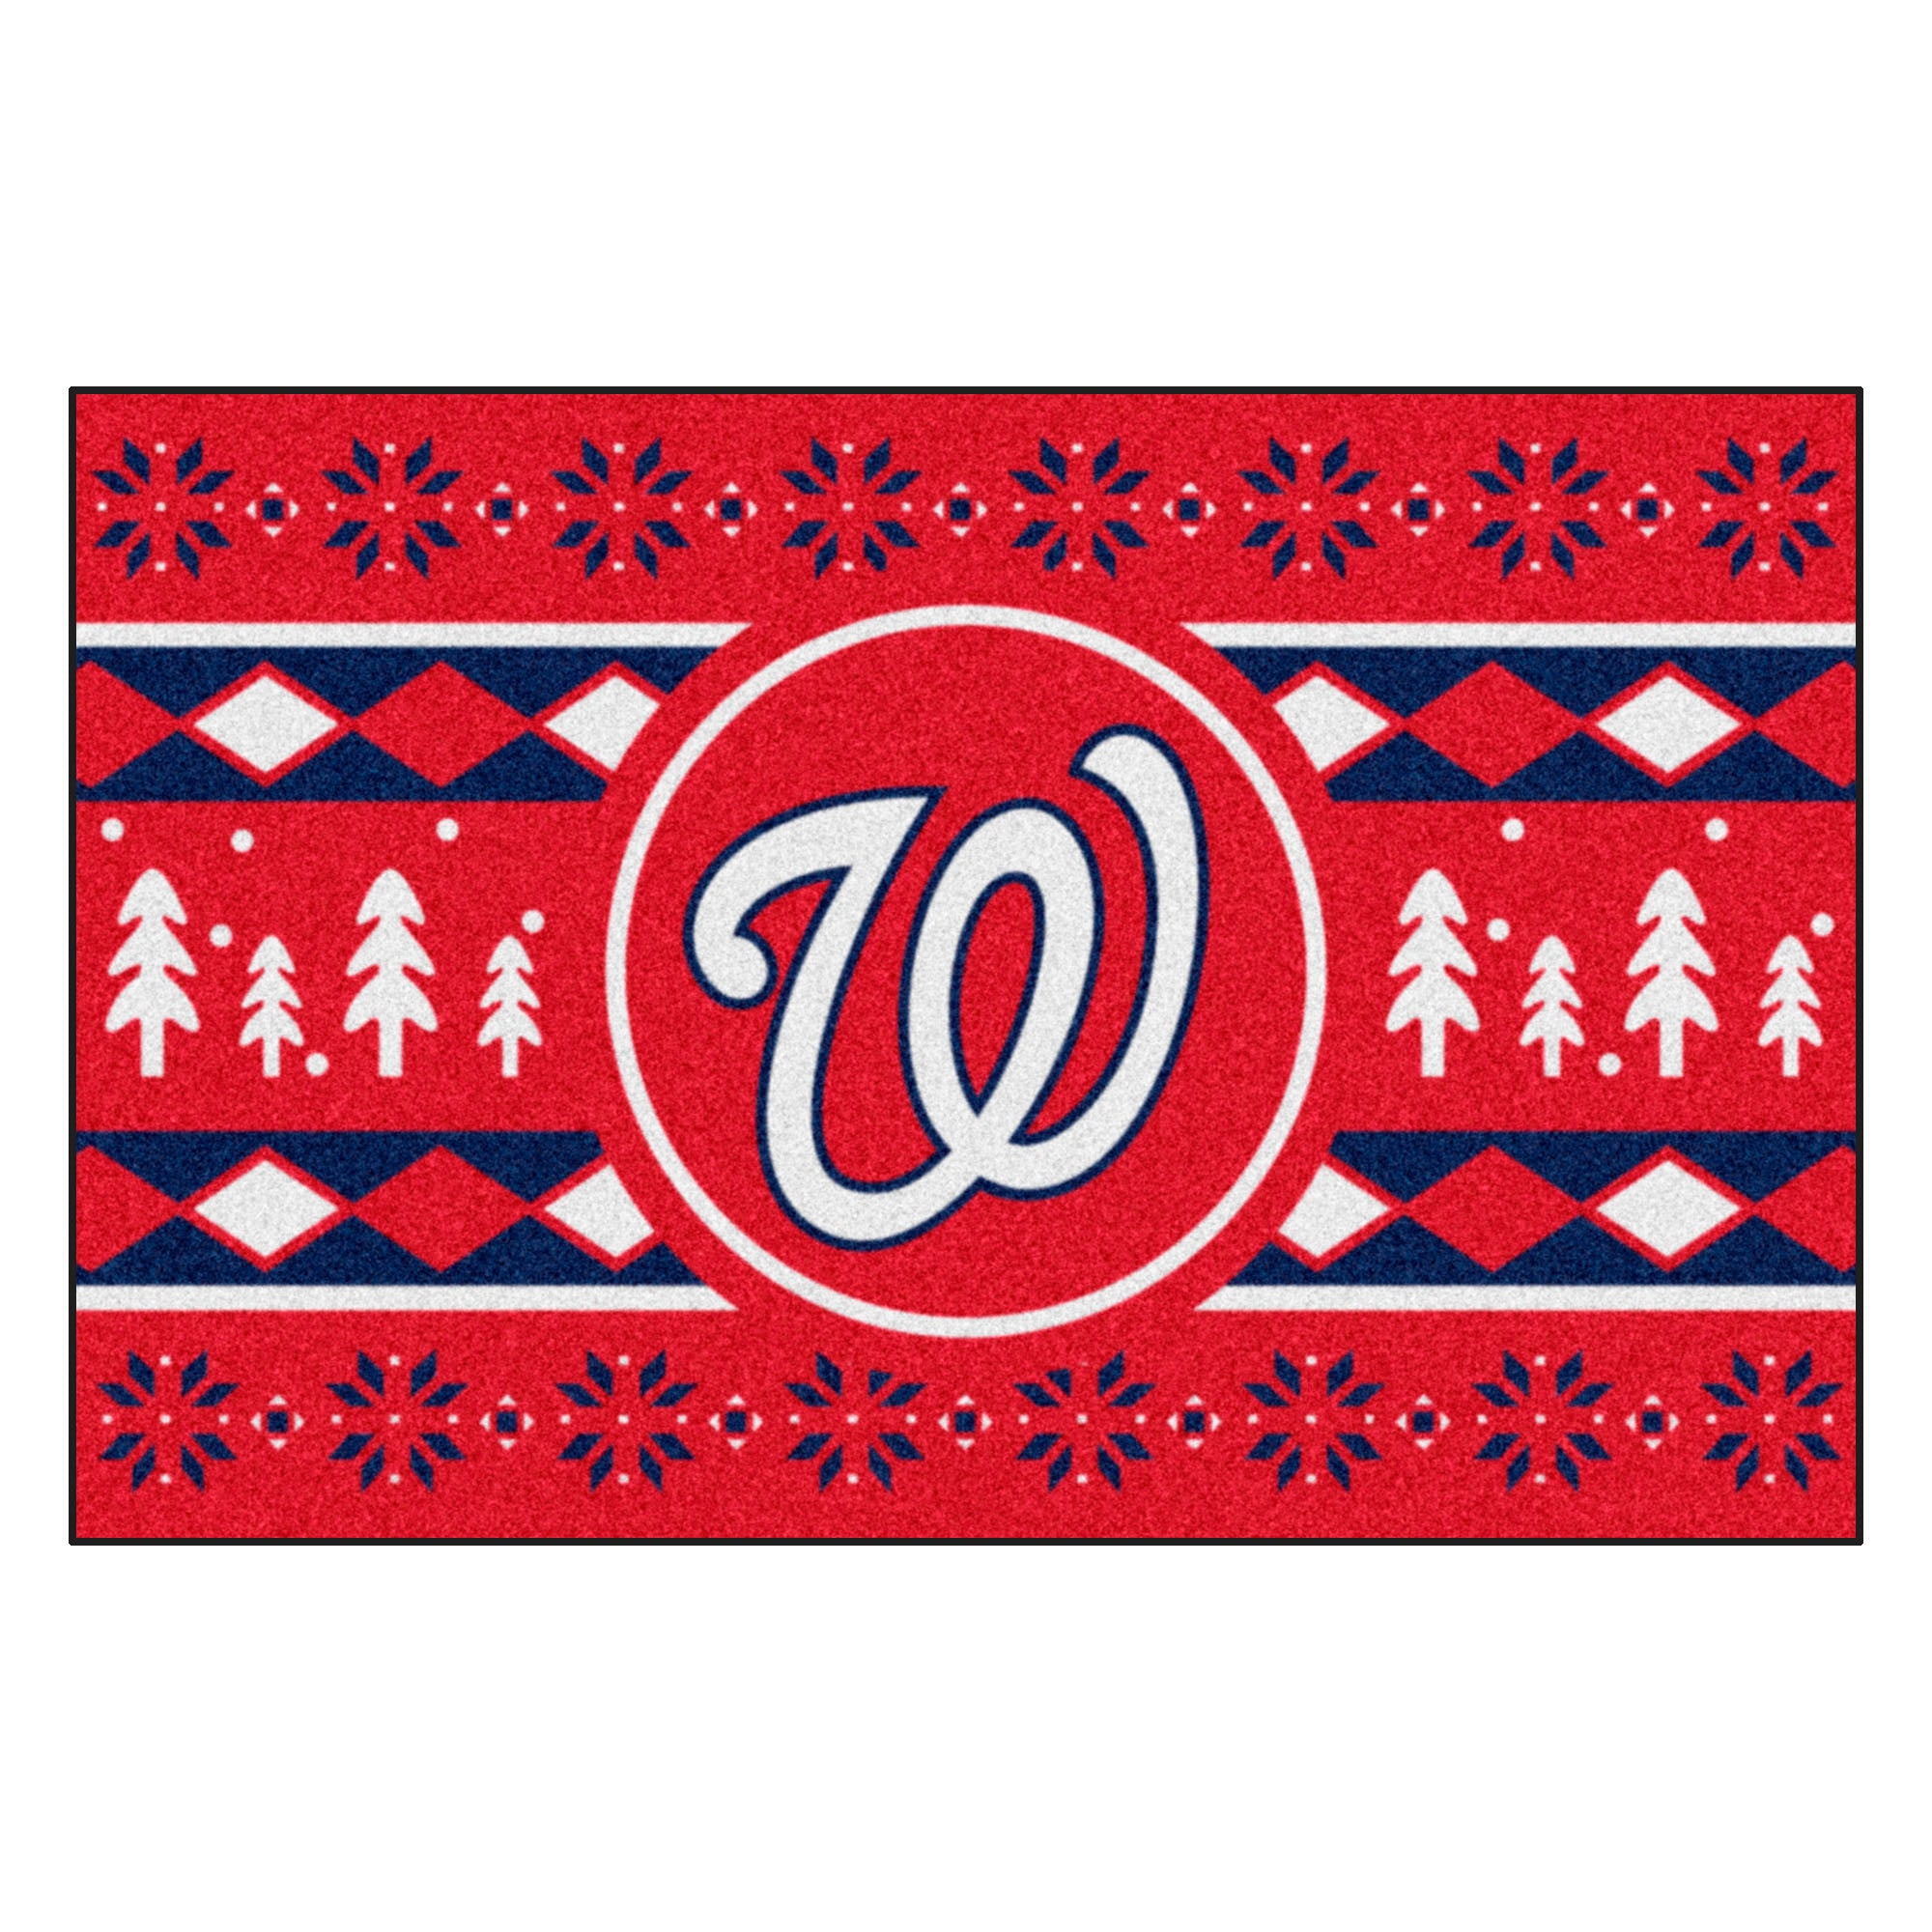 FANMATS, MLB - Washington Nationals Holiday Sweater Rug - 19in. x 30in.